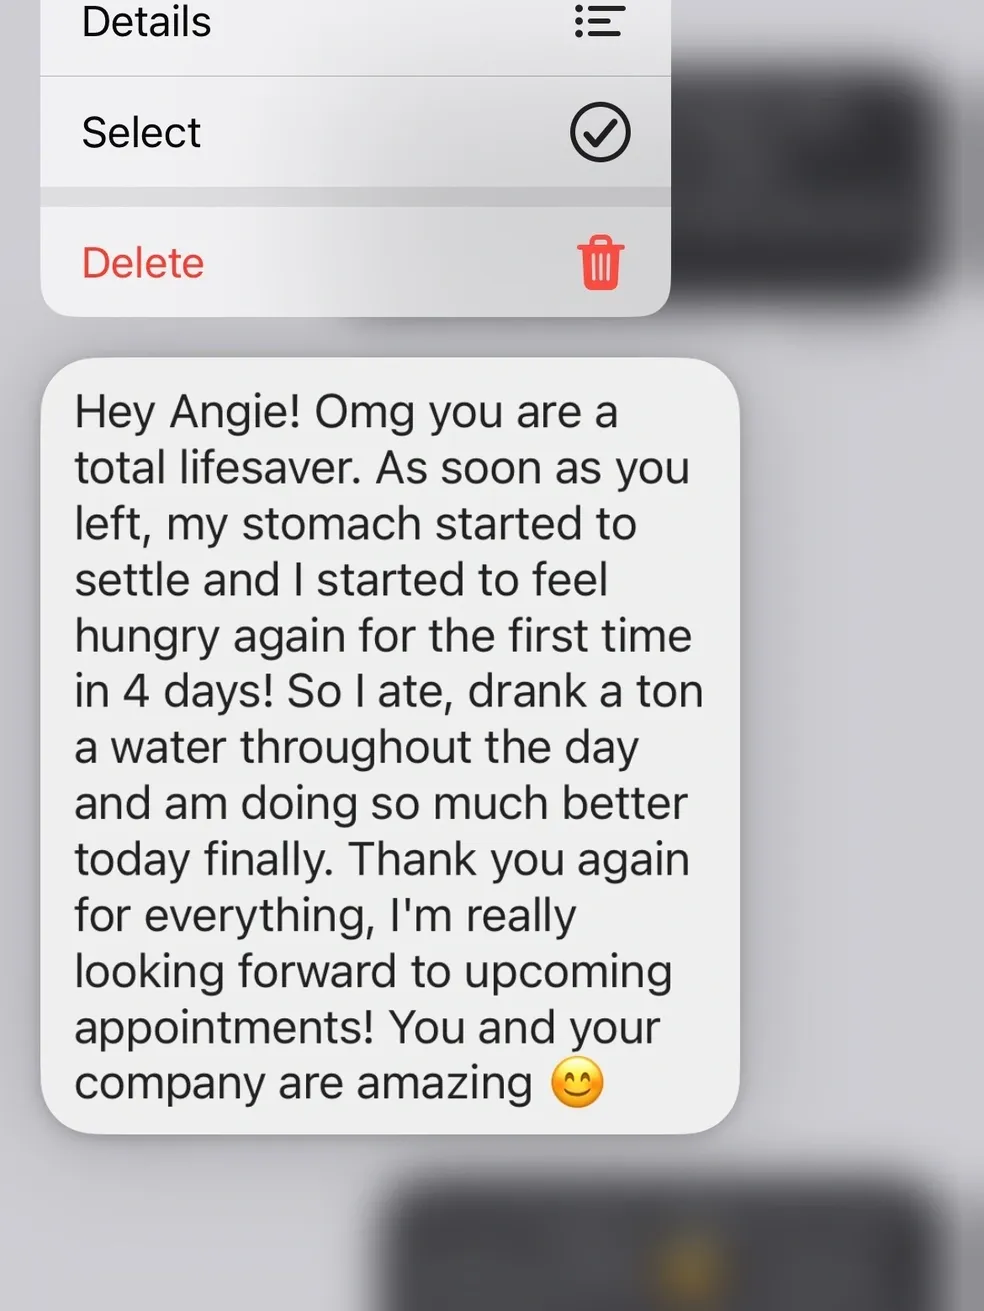 A text message on an iphone.